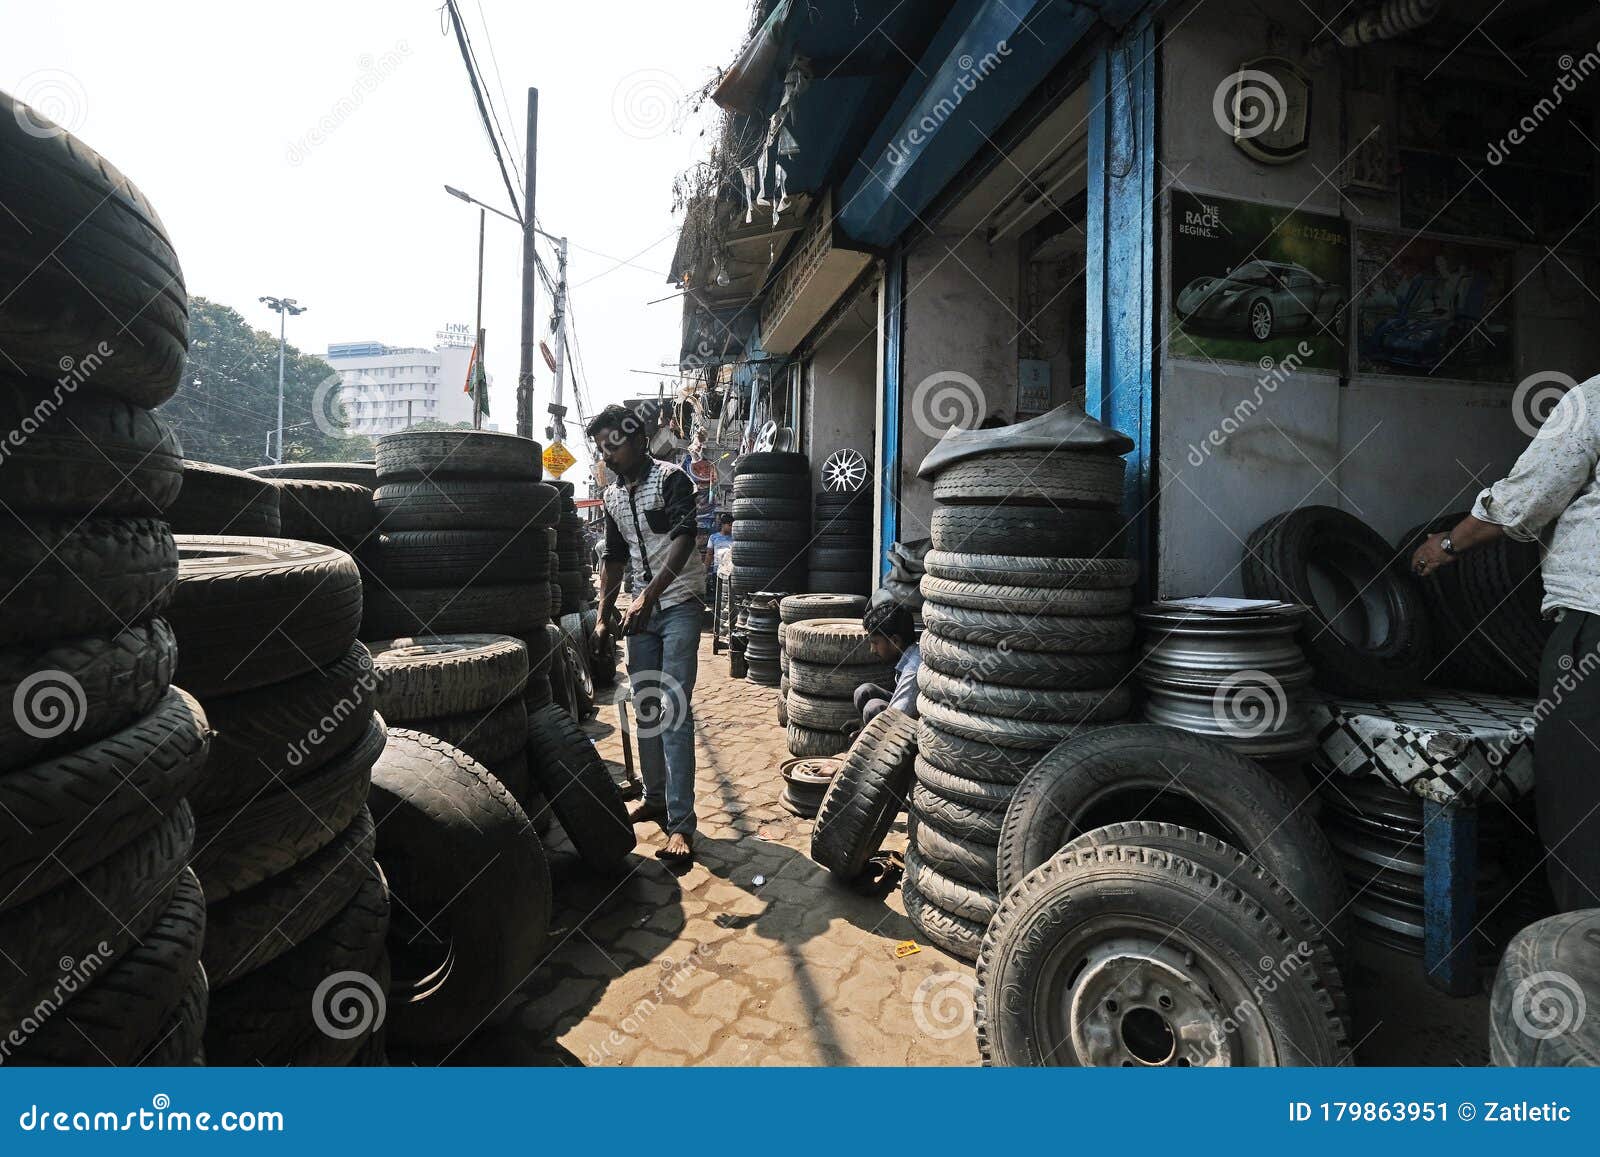 Cheapest Car Parts And Accessories Market, Mallick Bazar In Kolkata Editorial Photo - Image of ...